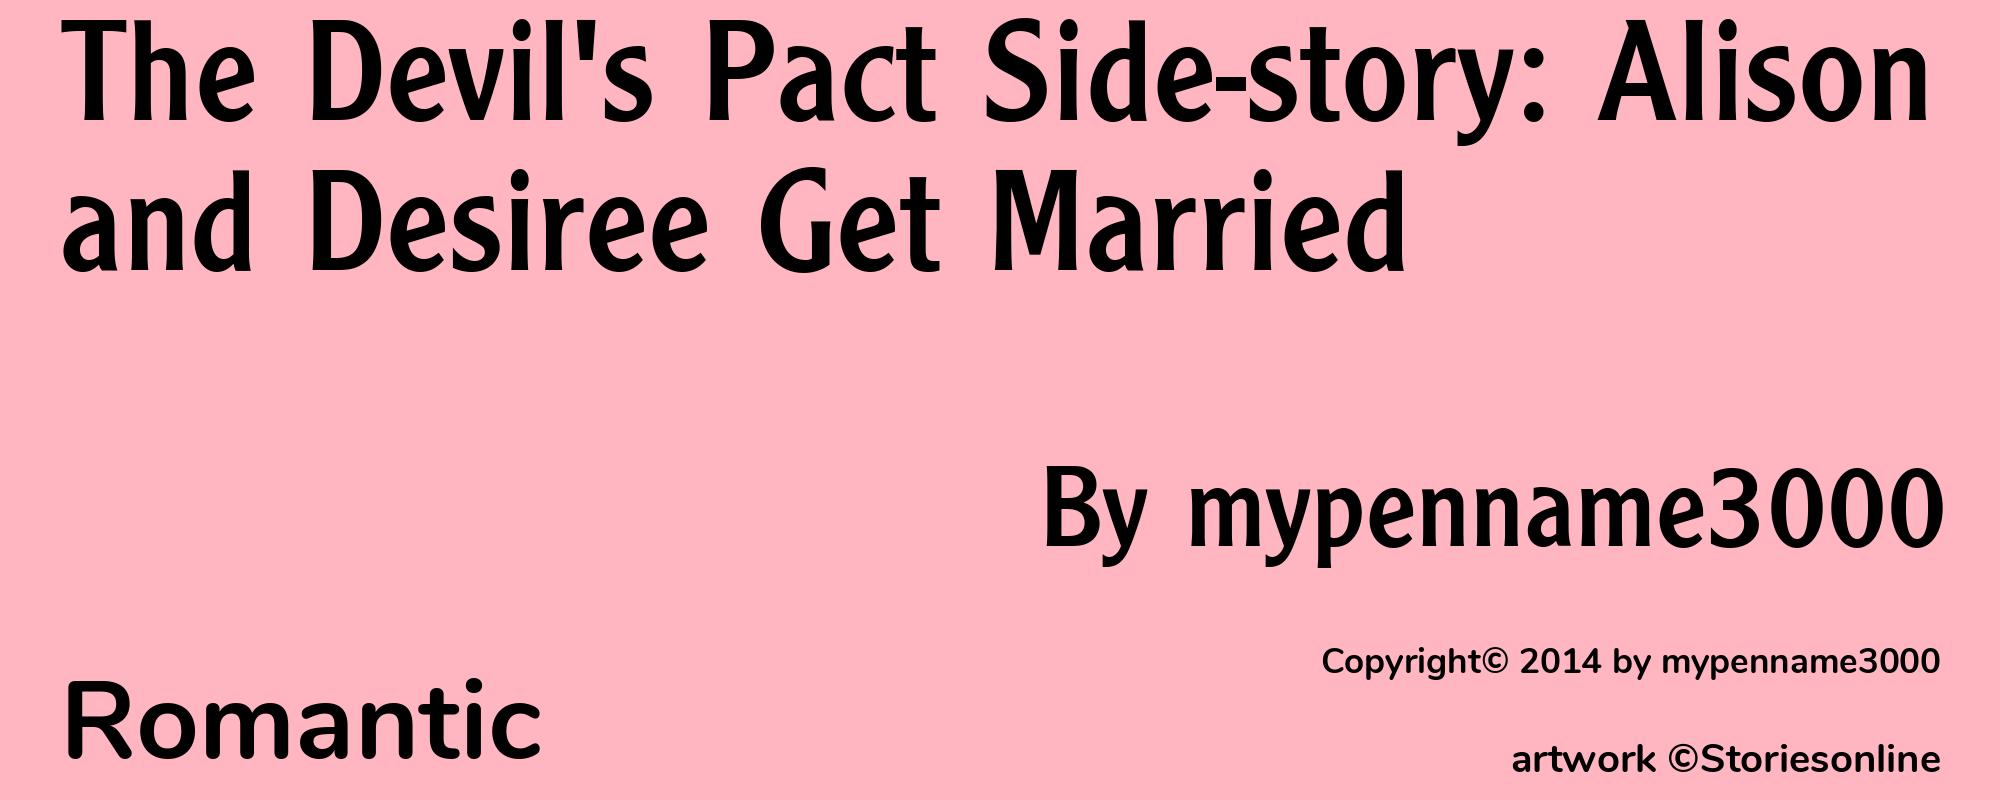 The Devil's Pact Side-story: Alison and Desiree Get Married - Cover